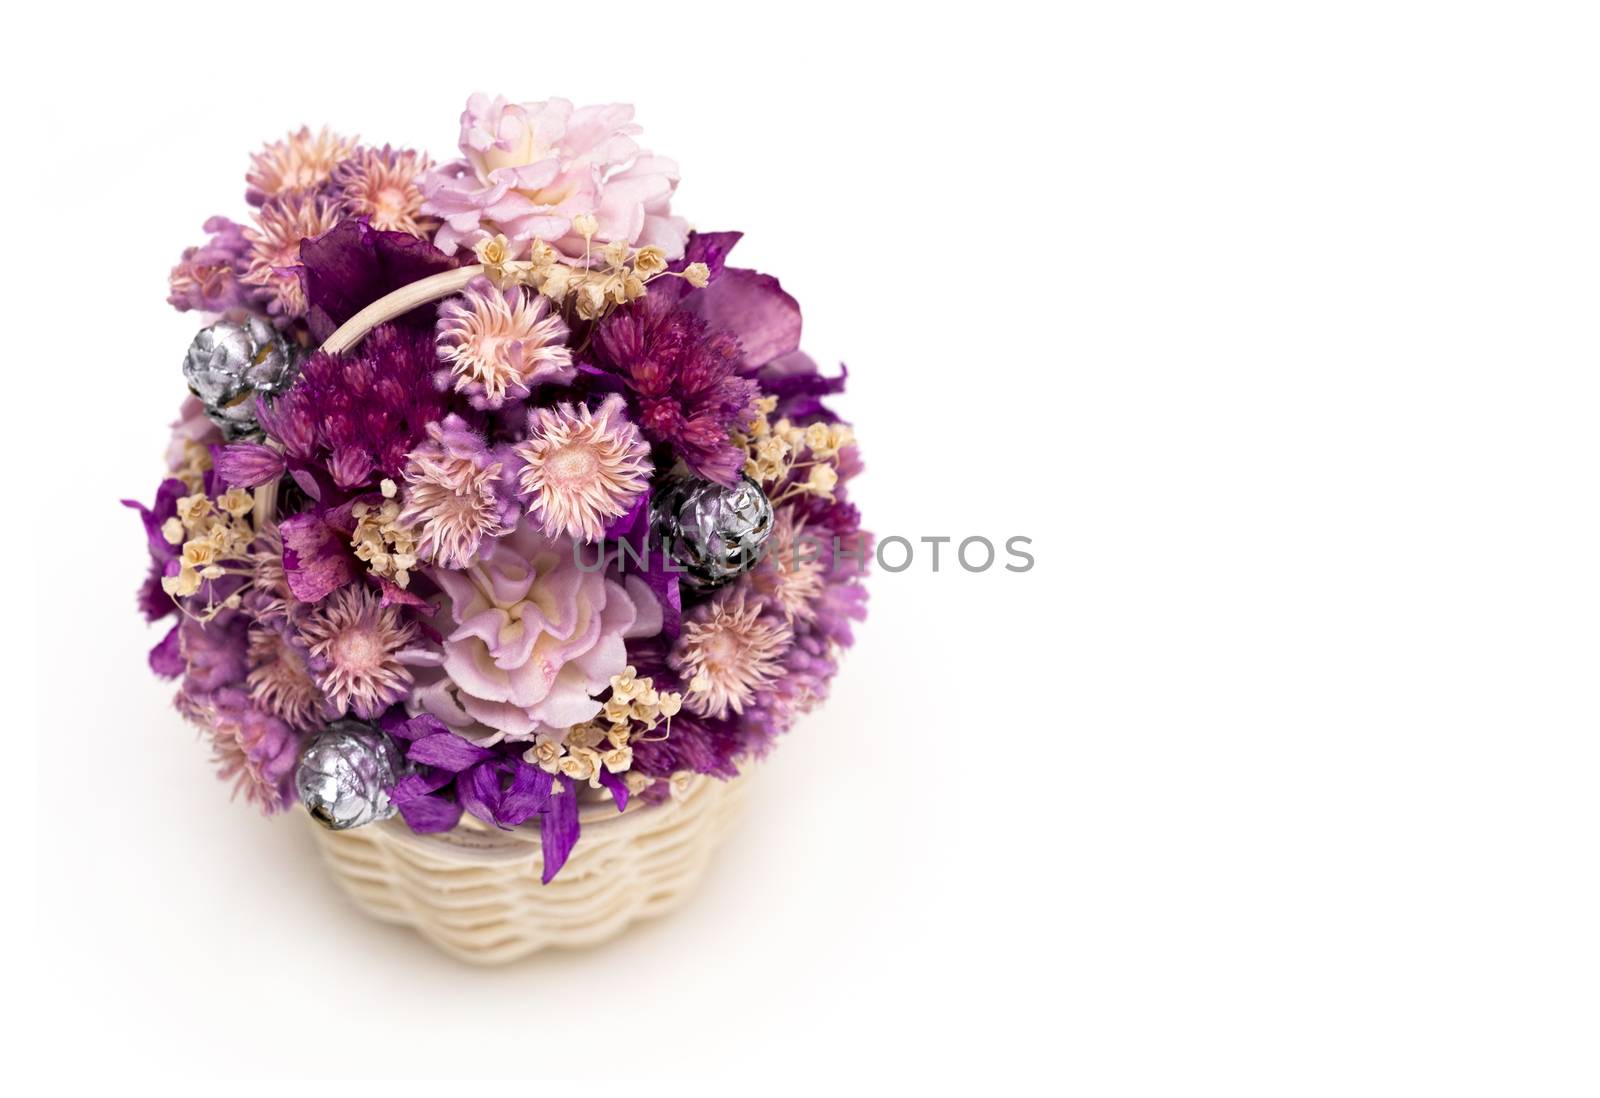 Basket of dried flowers by Nawoot